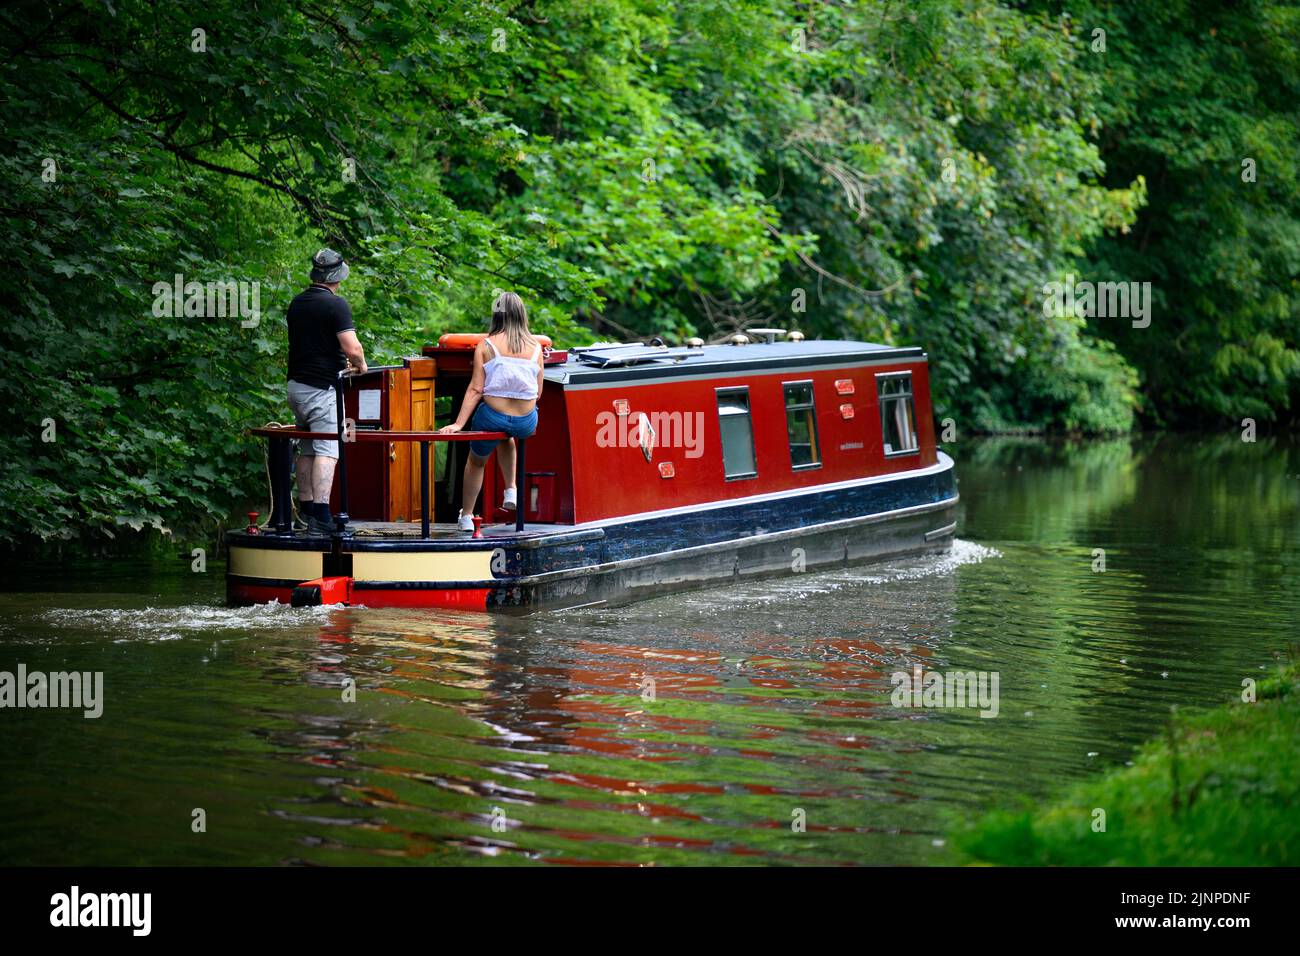 Couple relaxing on red cruiser-style narrow boat moving slowly along scenic quiet rural Leeds Liverpool Canal - Bingley, West Yorkshire, England, UK. Stock Photo